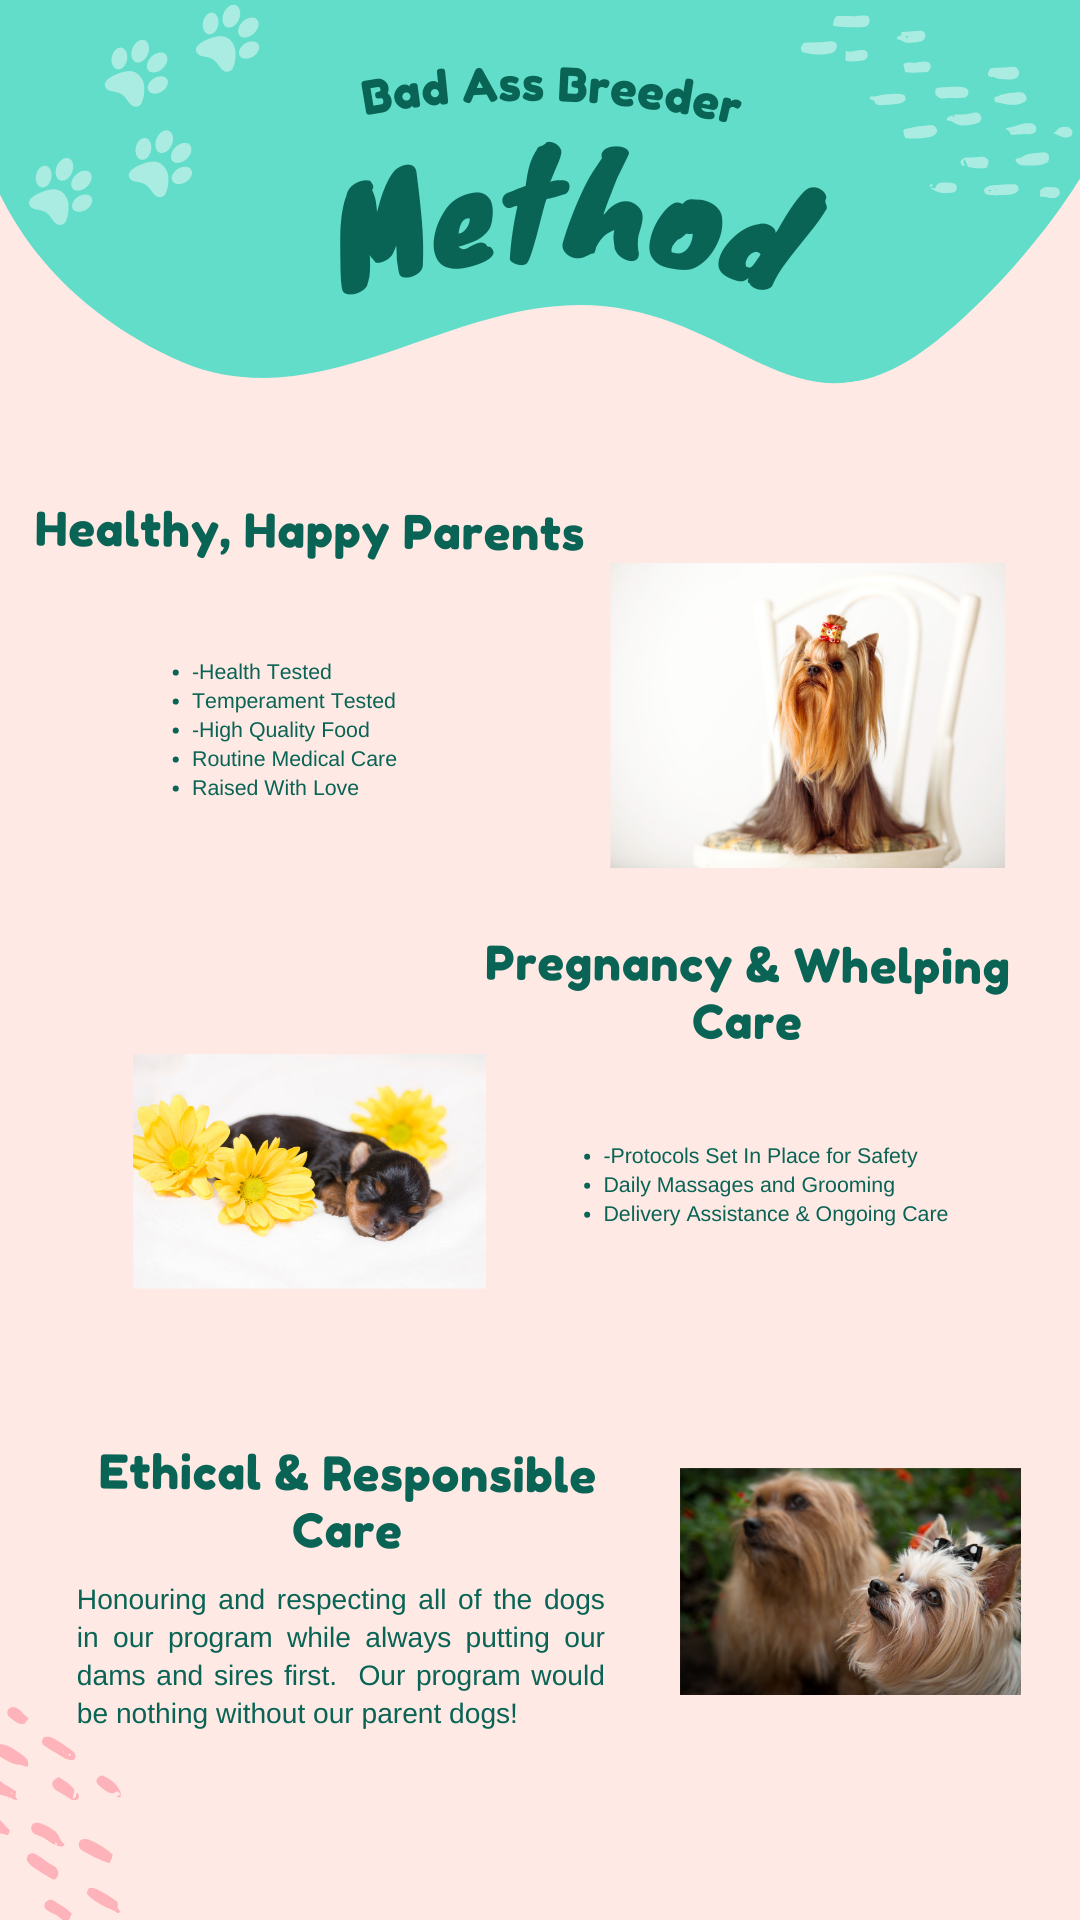 Check out the ultimate dog breeder method infographic! Learn the best techniques with this Bad Ass Breeder Method guide